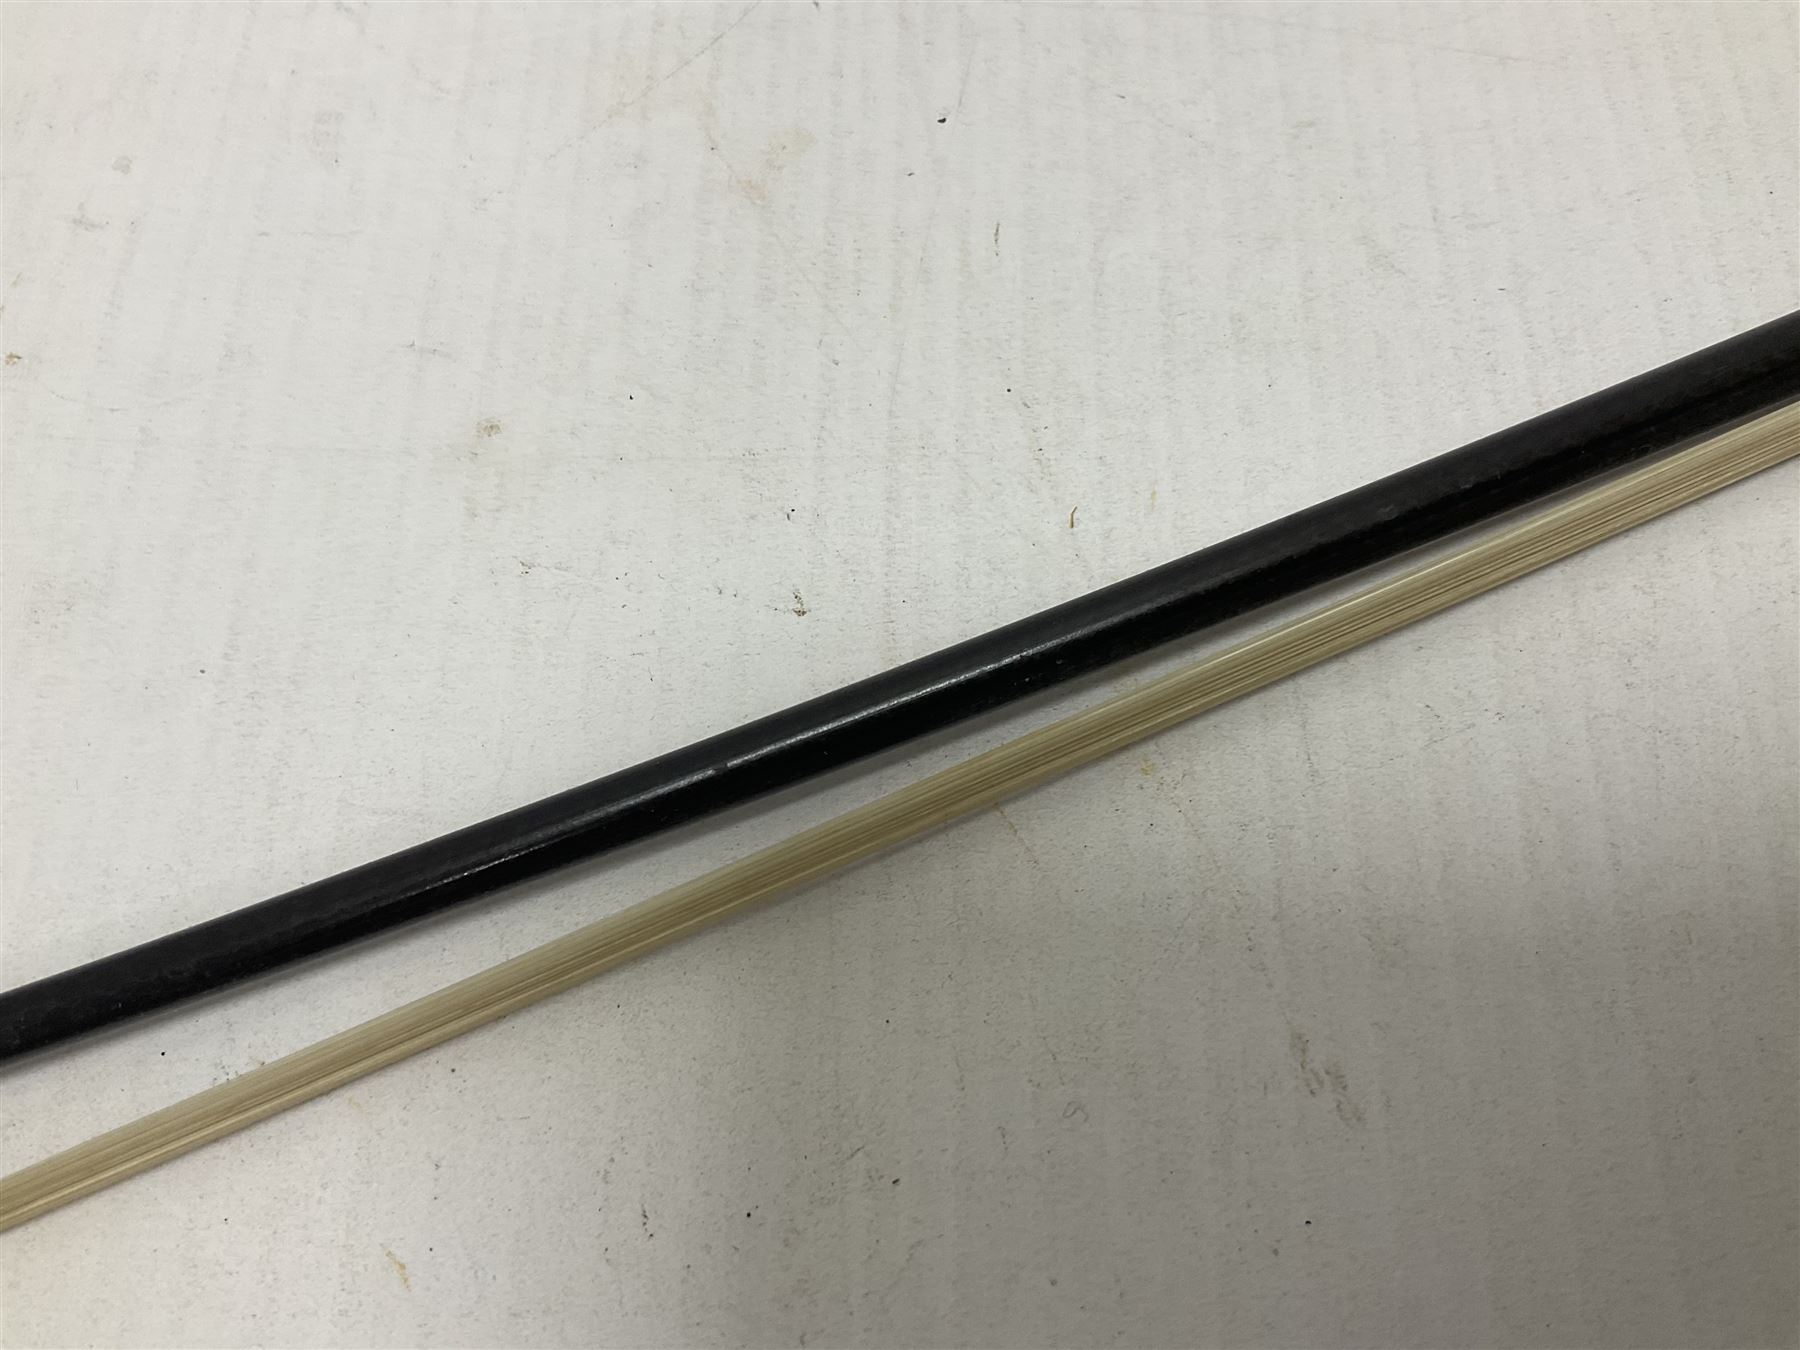 CodaBow Diamond carbon fibre violin bow with Nickel plated fittings - Image 11 of 13